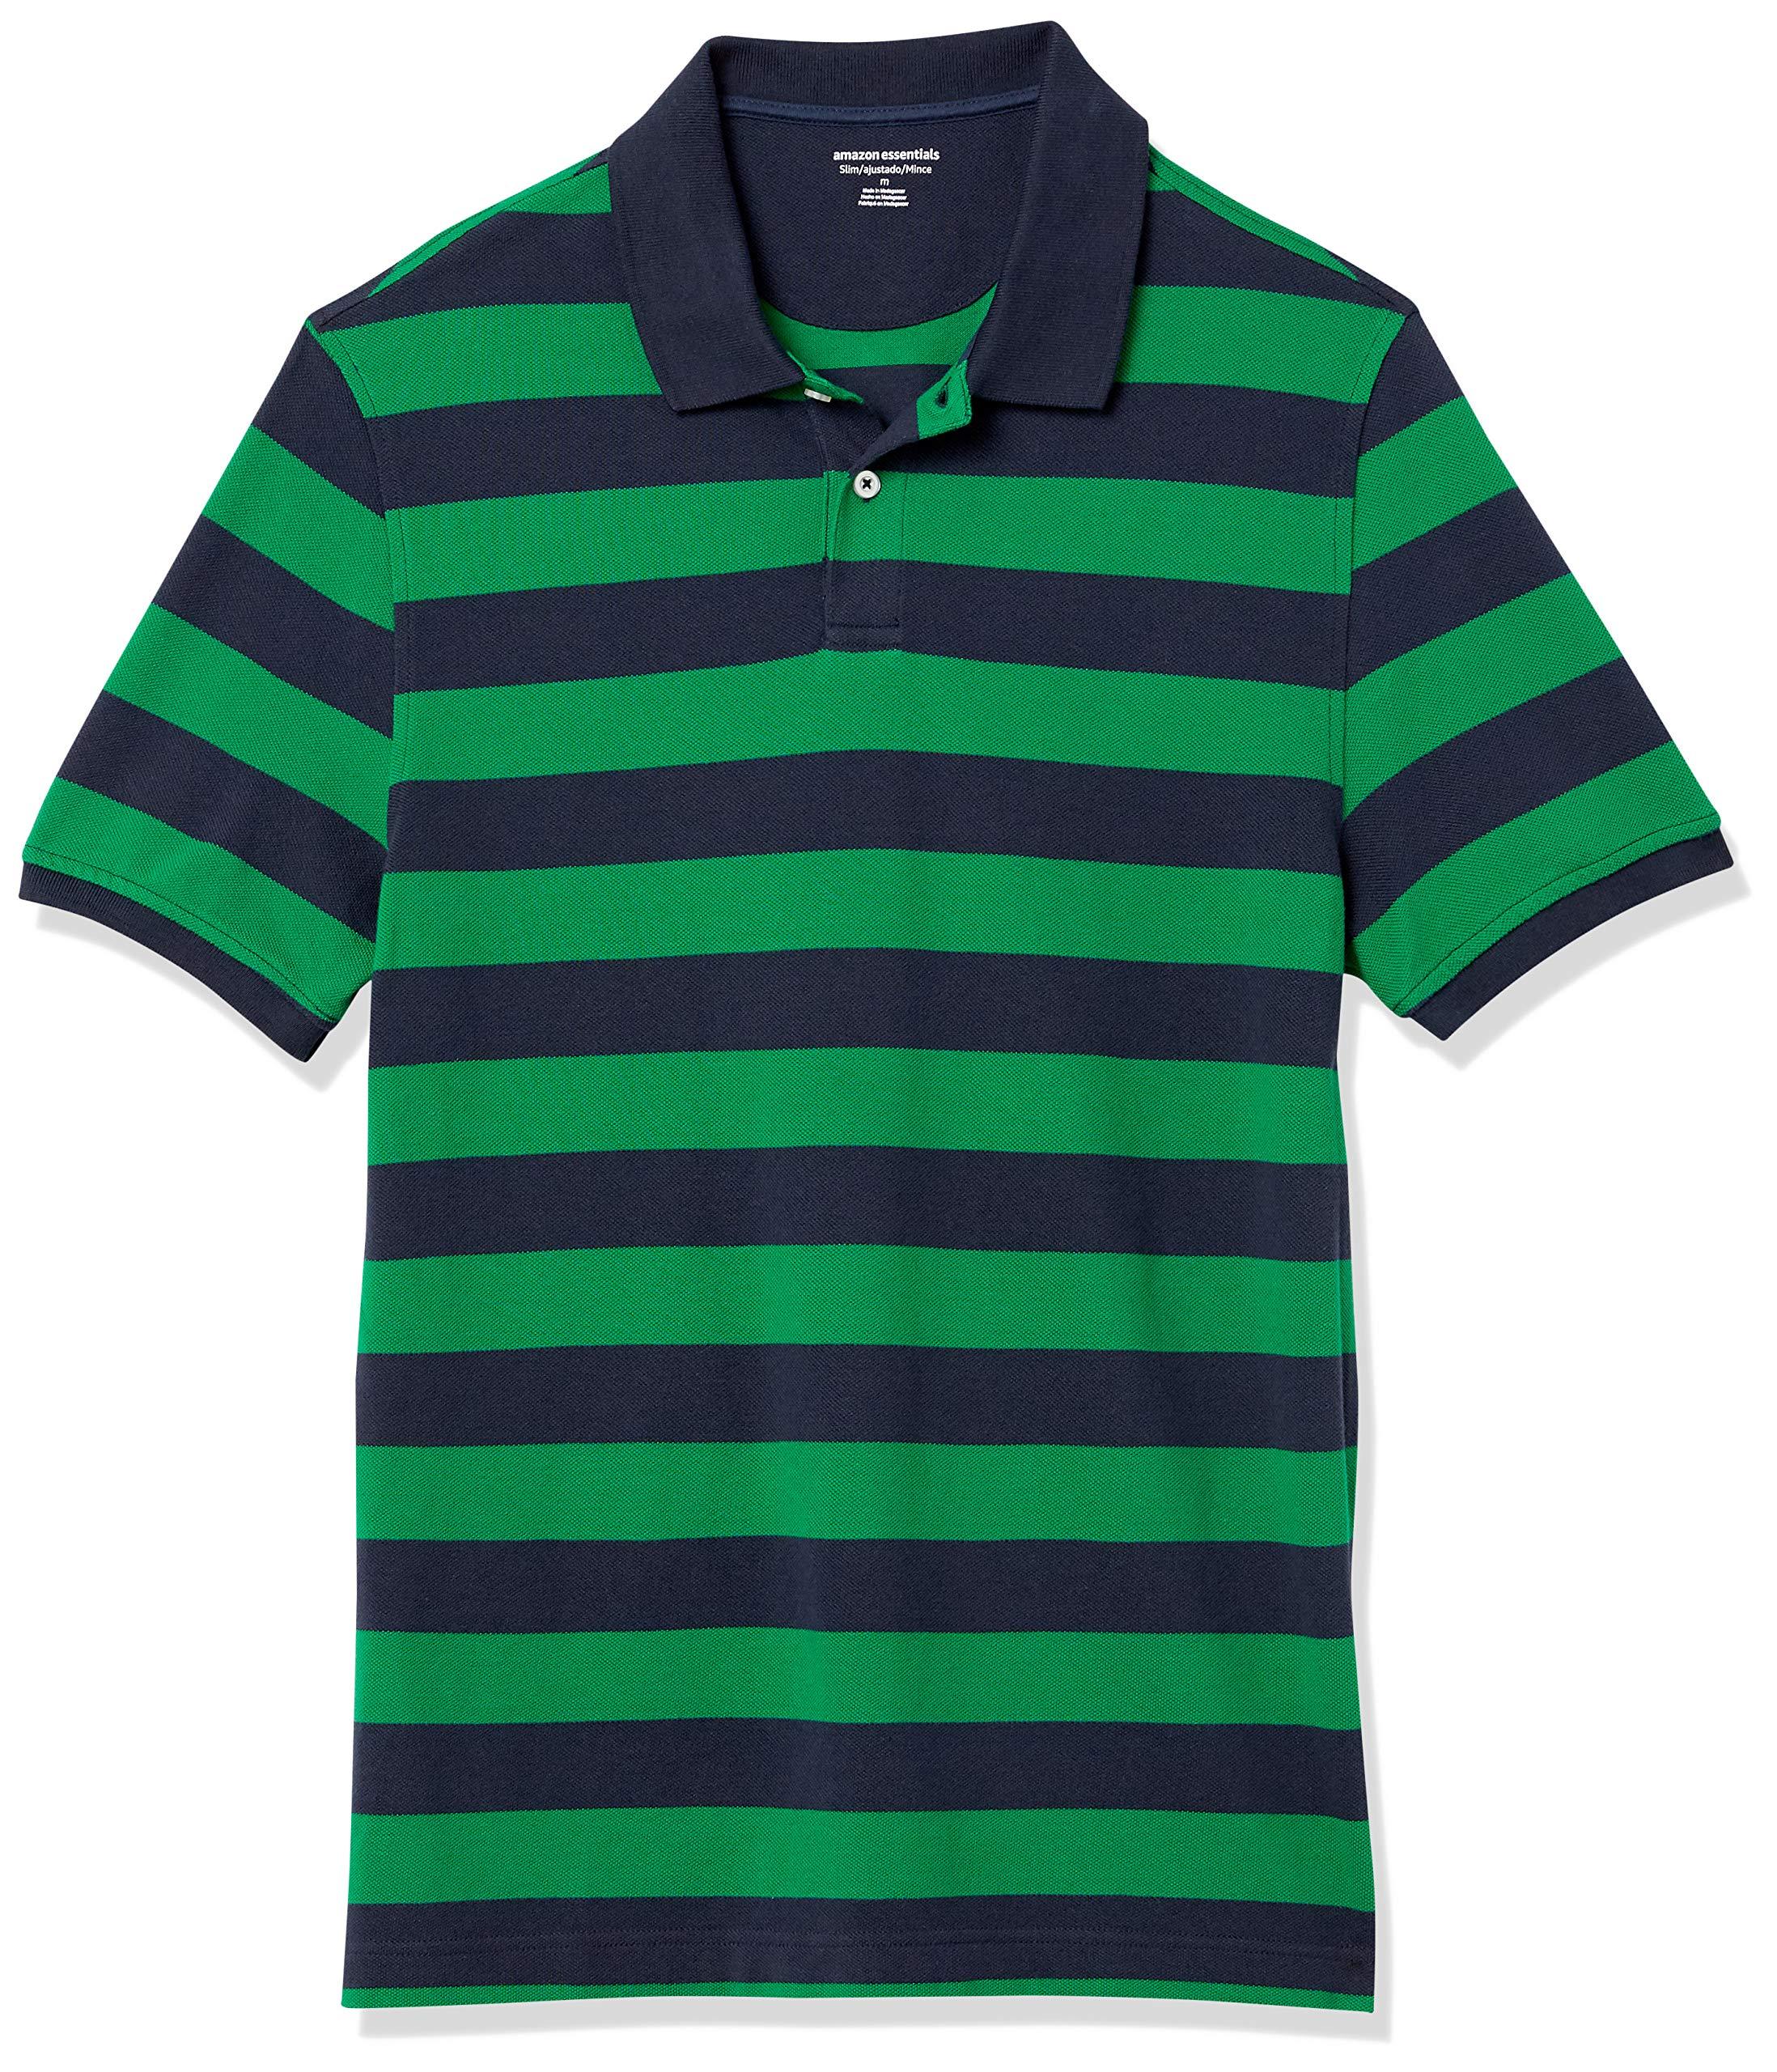 Amazon Essentials Slim-fit Cotton Pique Polo Shirt in Green for Men - Lyst